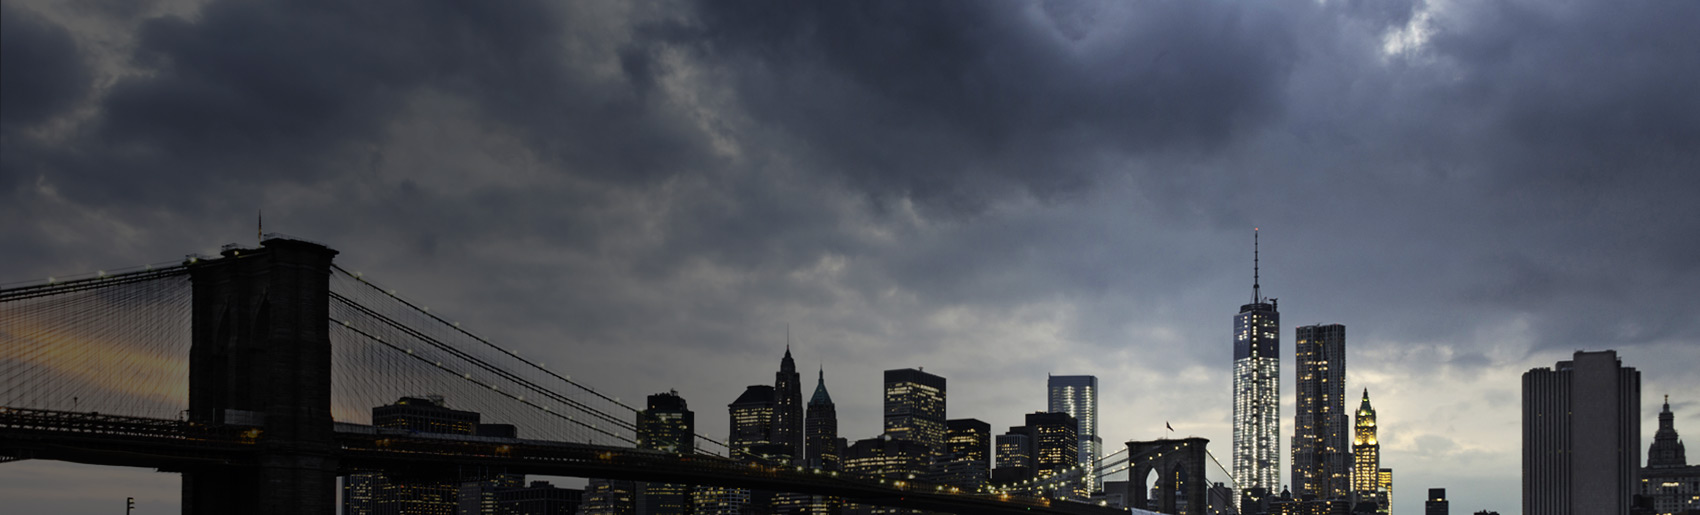 A view of New York City with storm clouds in the background